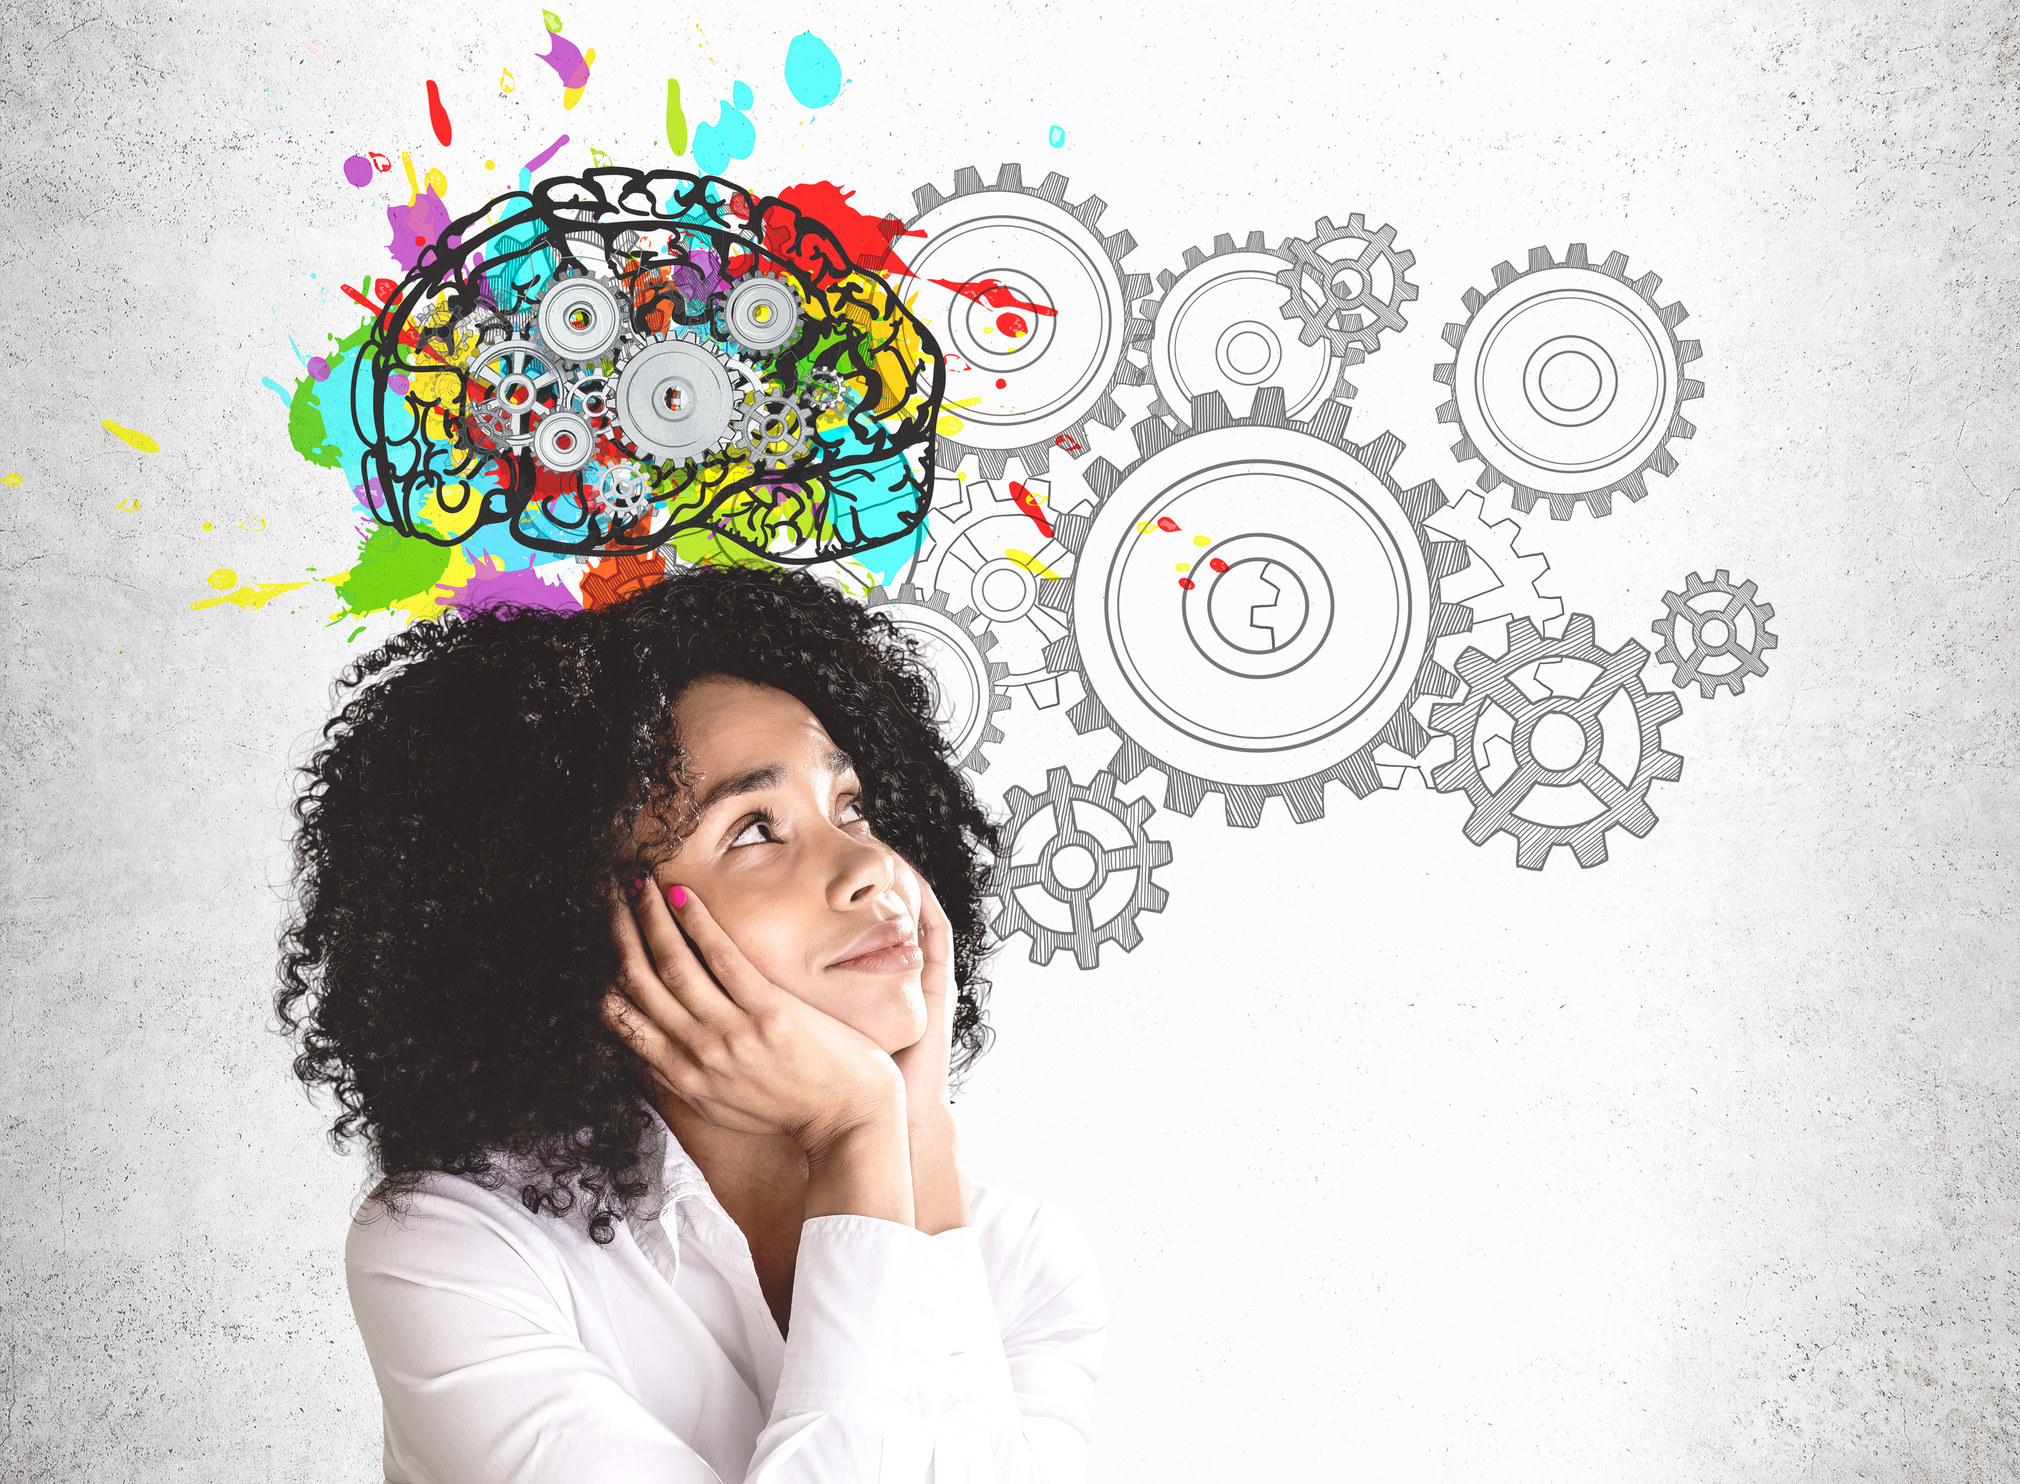 Woman thinking with illustrated brain and gears in background.